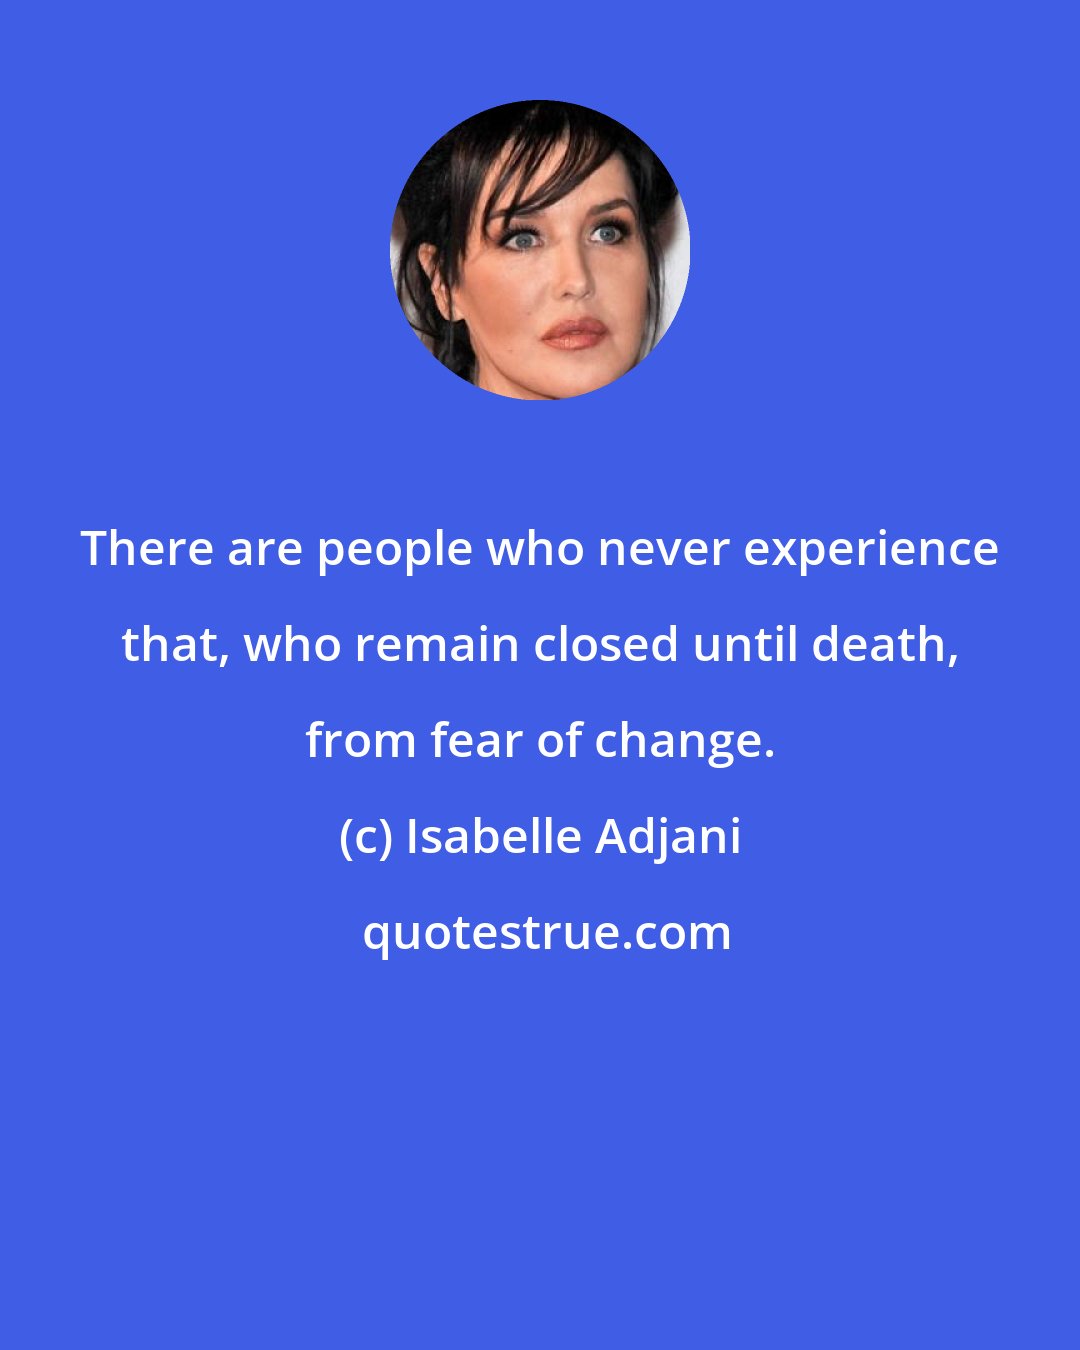 Isabelle Adjani: There are people who never experience that, who remain closed until death, from fear of change.